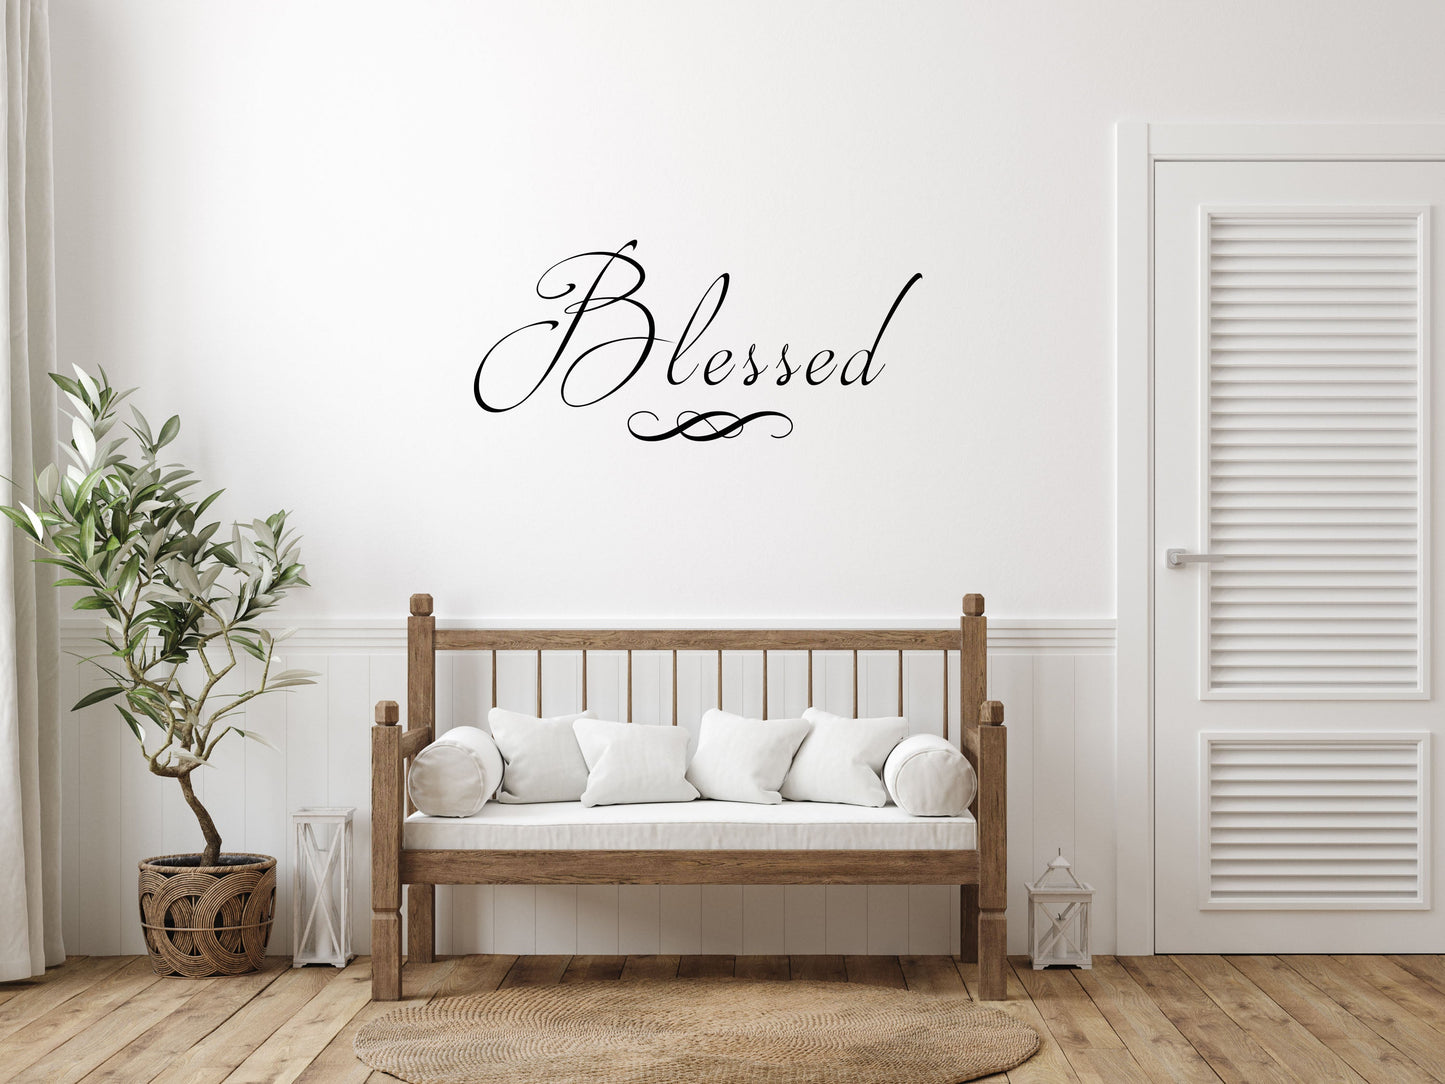 Blessed Bible Wall Bedroom Sticker Vinyl Wall Decal Inspirational Wall Signs 